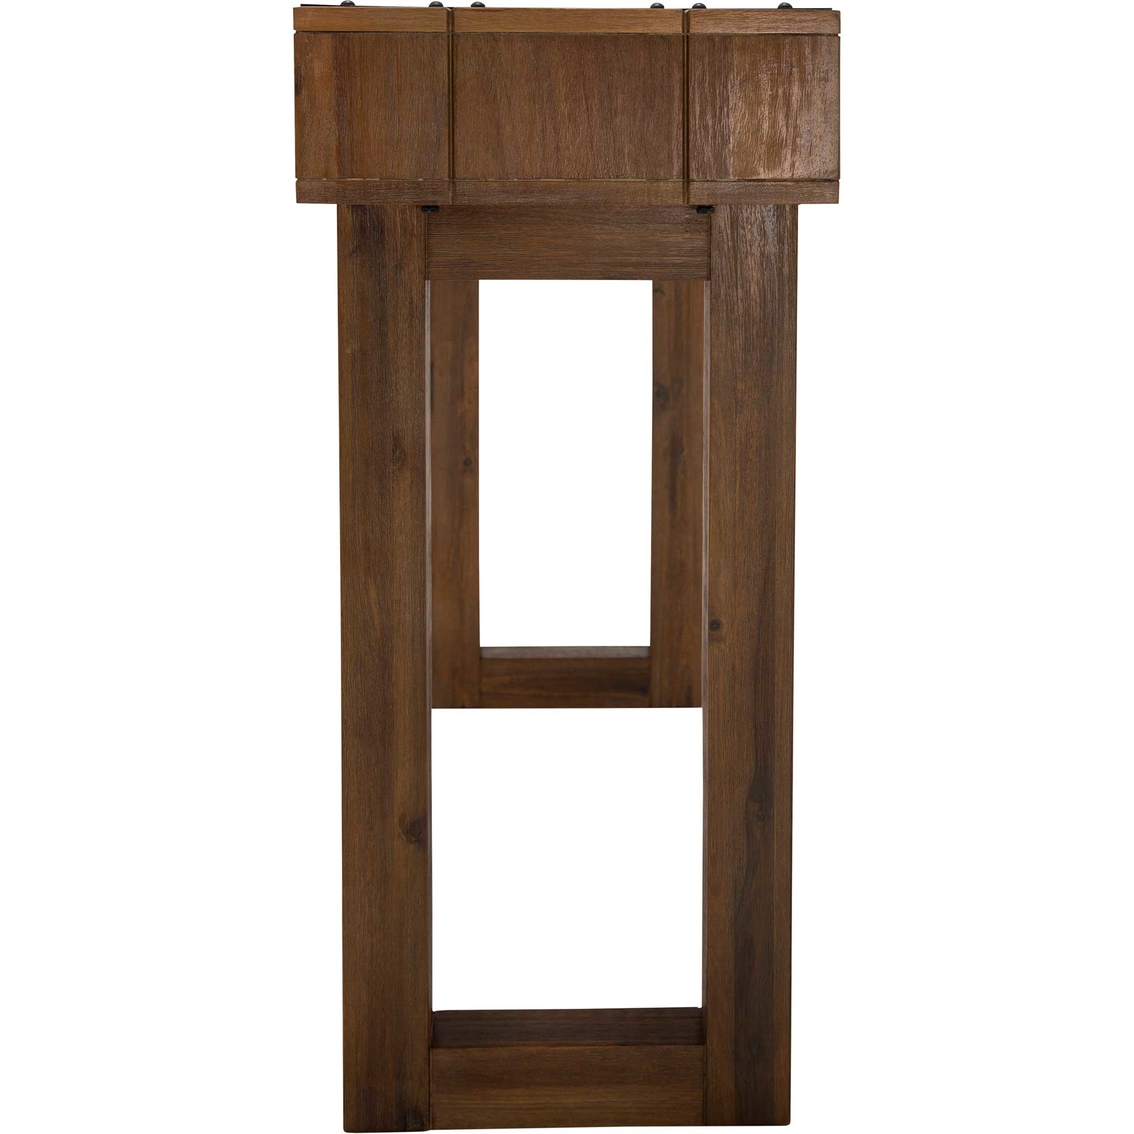 Kathy Ireland Home Brooklyn Walk Collection Console Table - Image 3 of 5